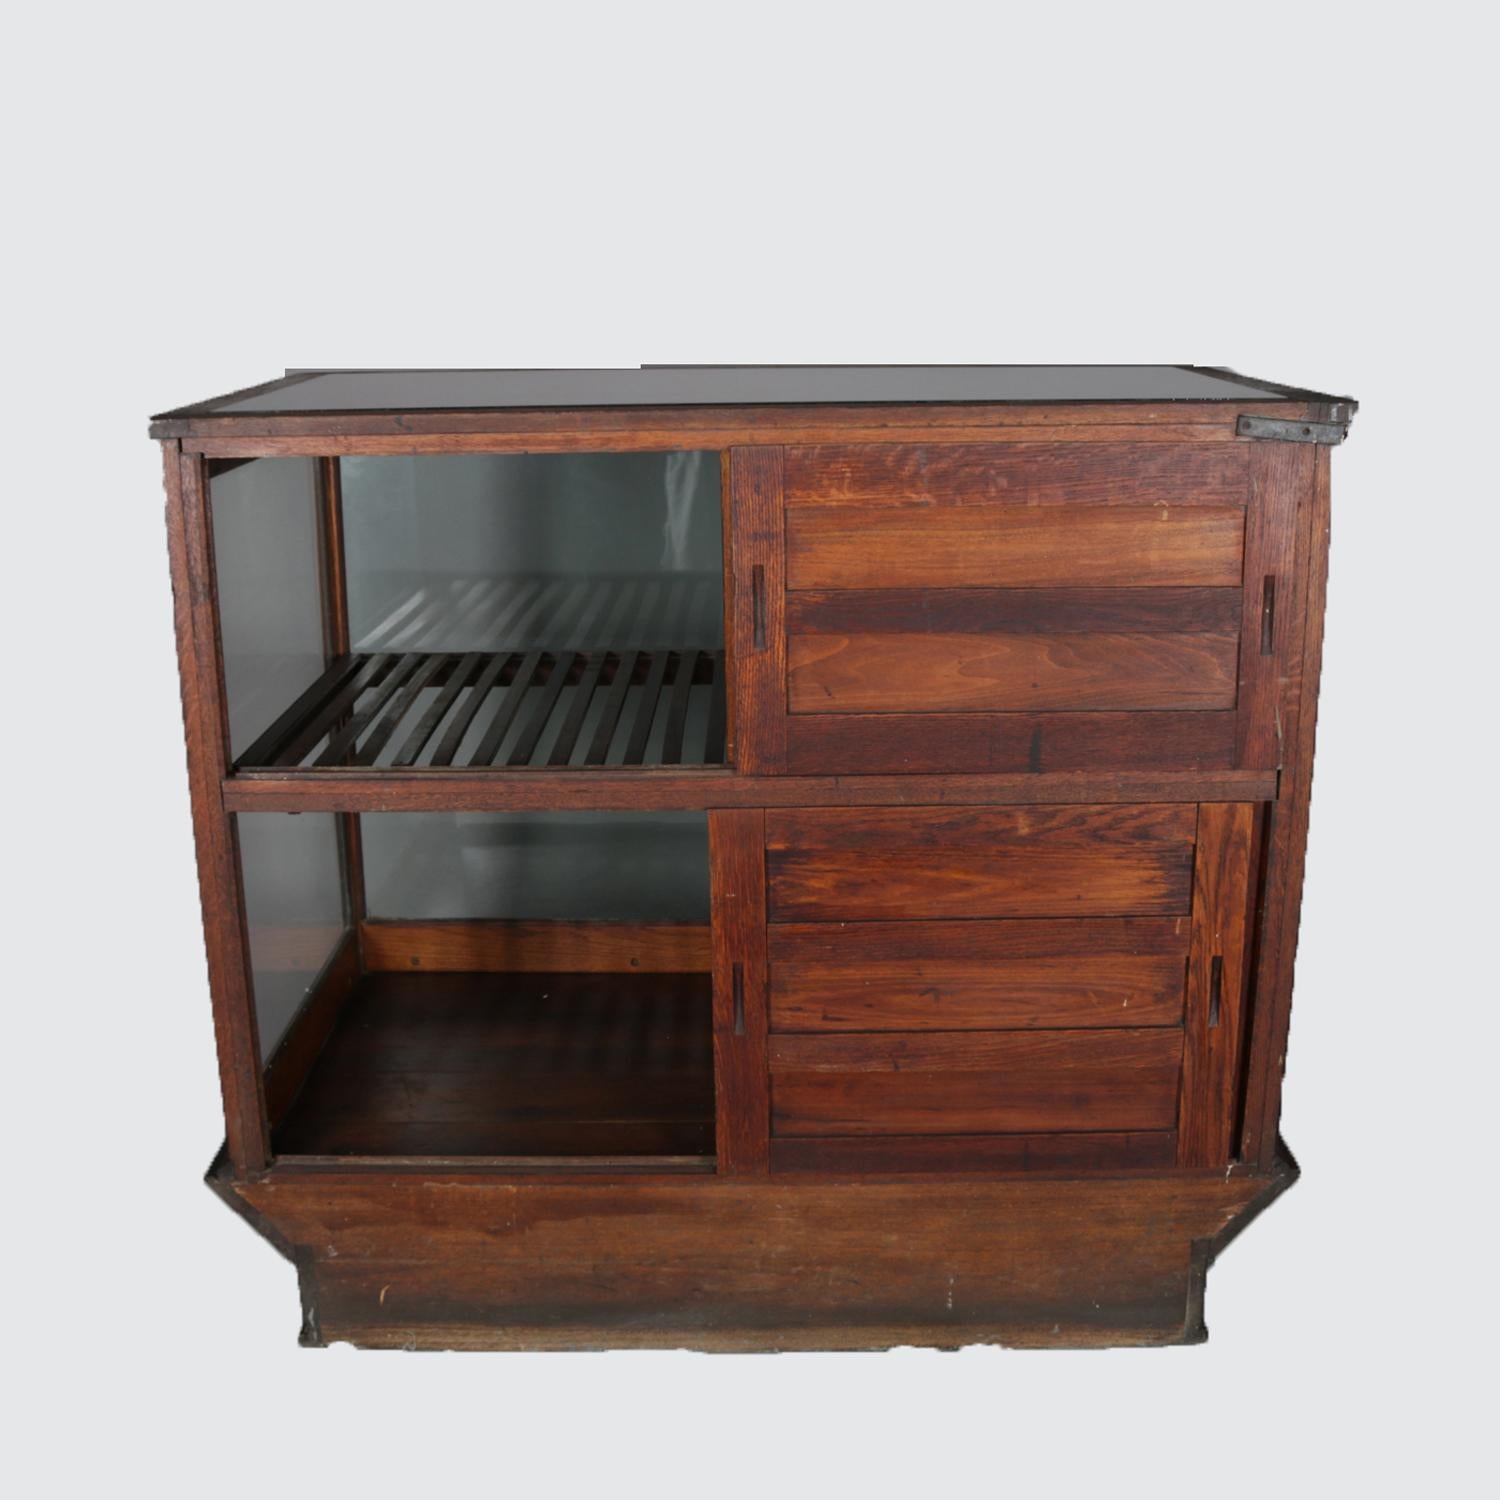 American Antique Oak and Glass Country Store Display Cabinet by Sun Mfg. Co., circa 1900